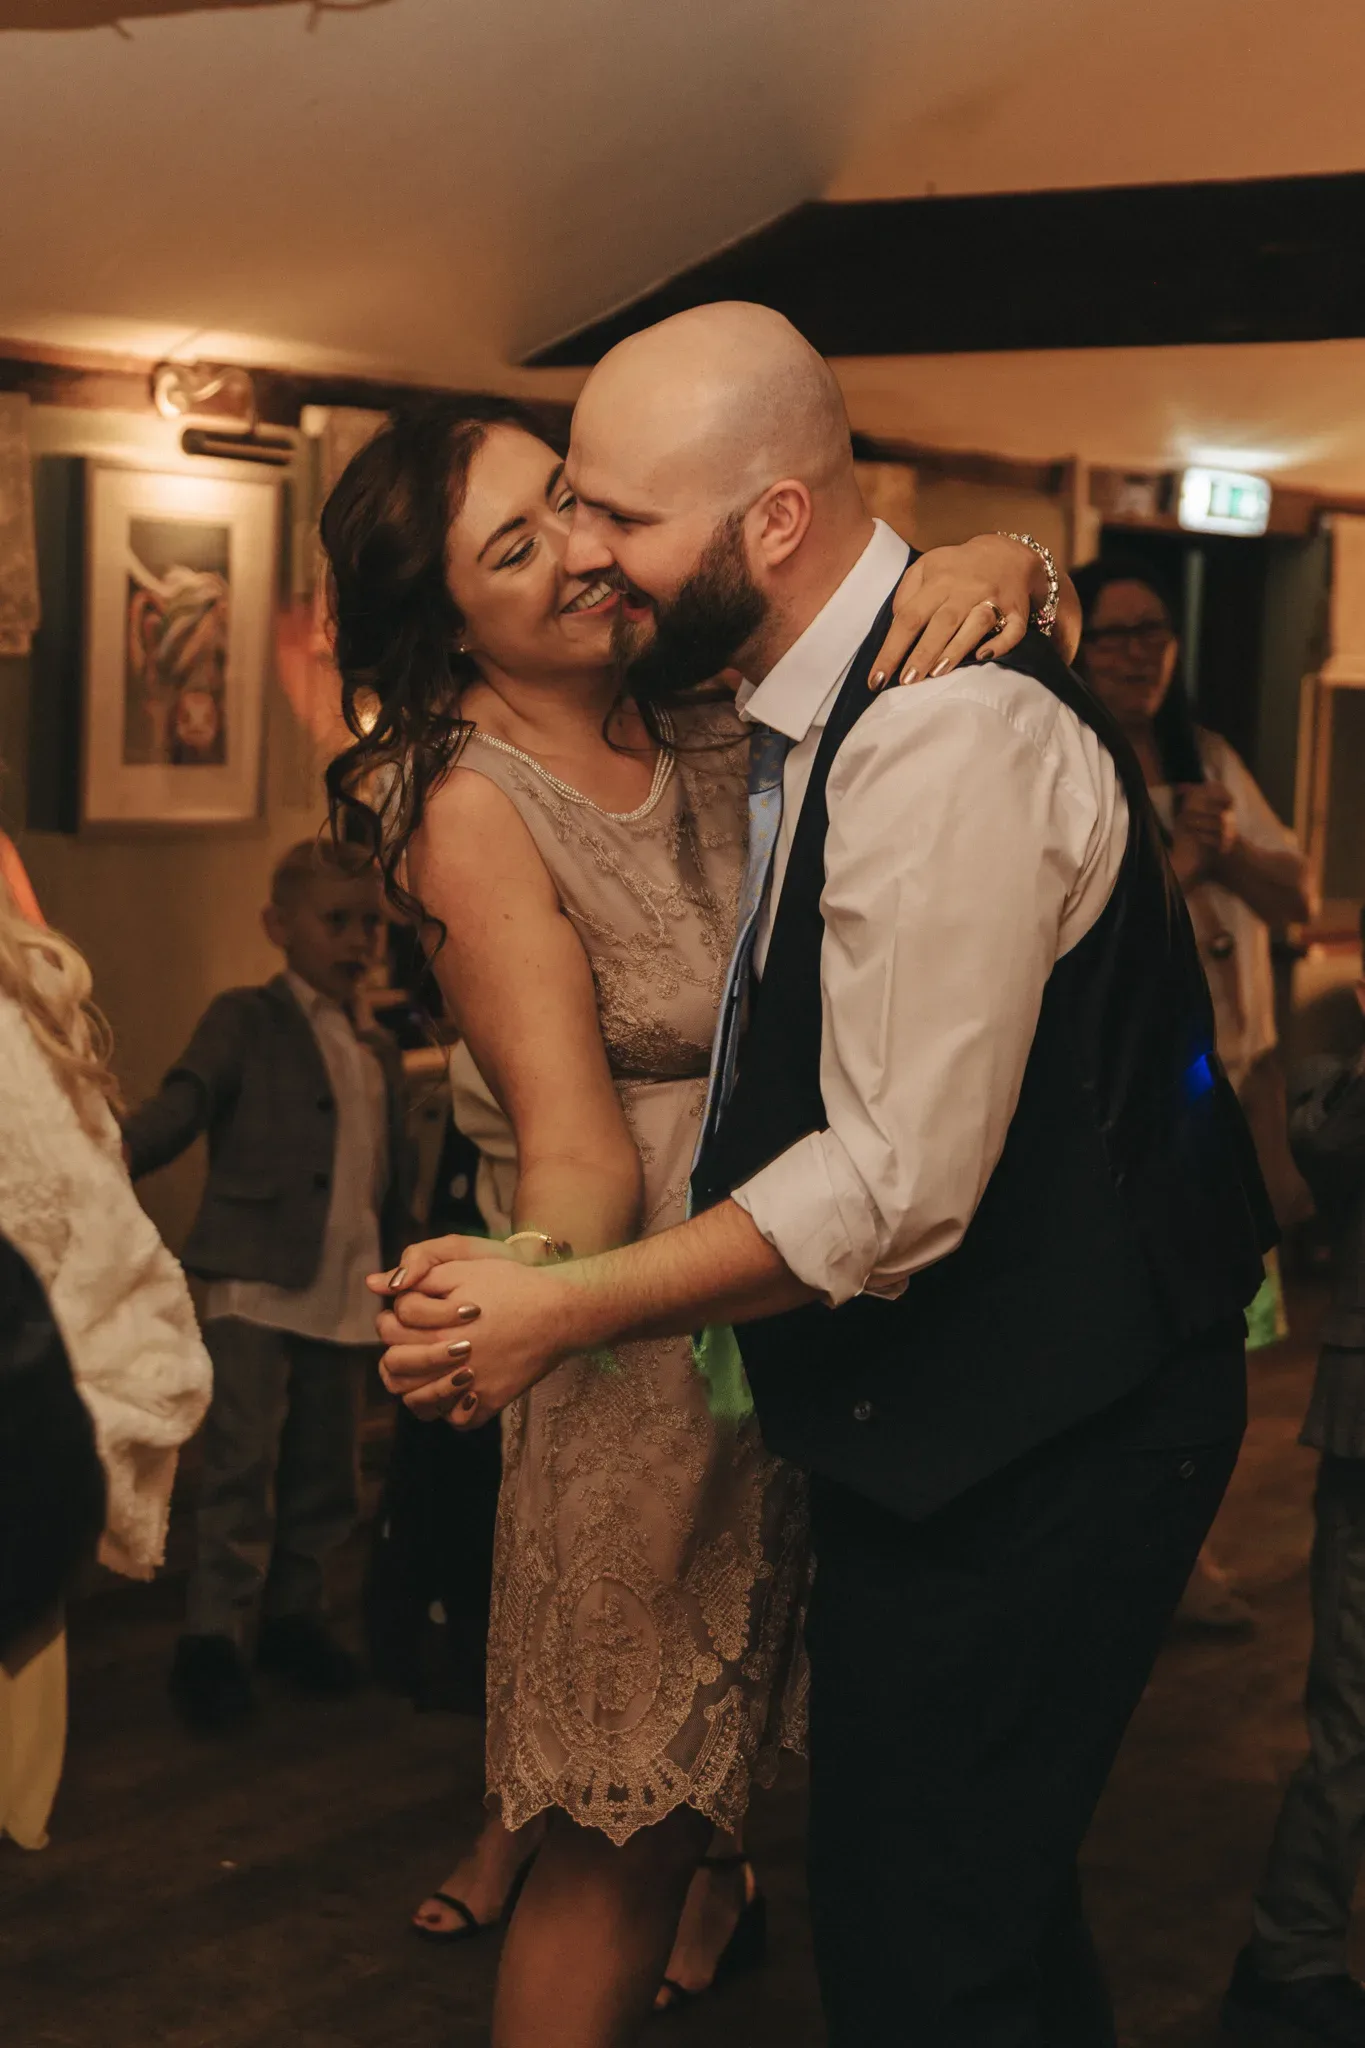 A couple shares a joyous dance, the woman in a lace dress and the man in a vest and tie, both smiling affectionately, surrounded by a warm, celebratory ambiance.